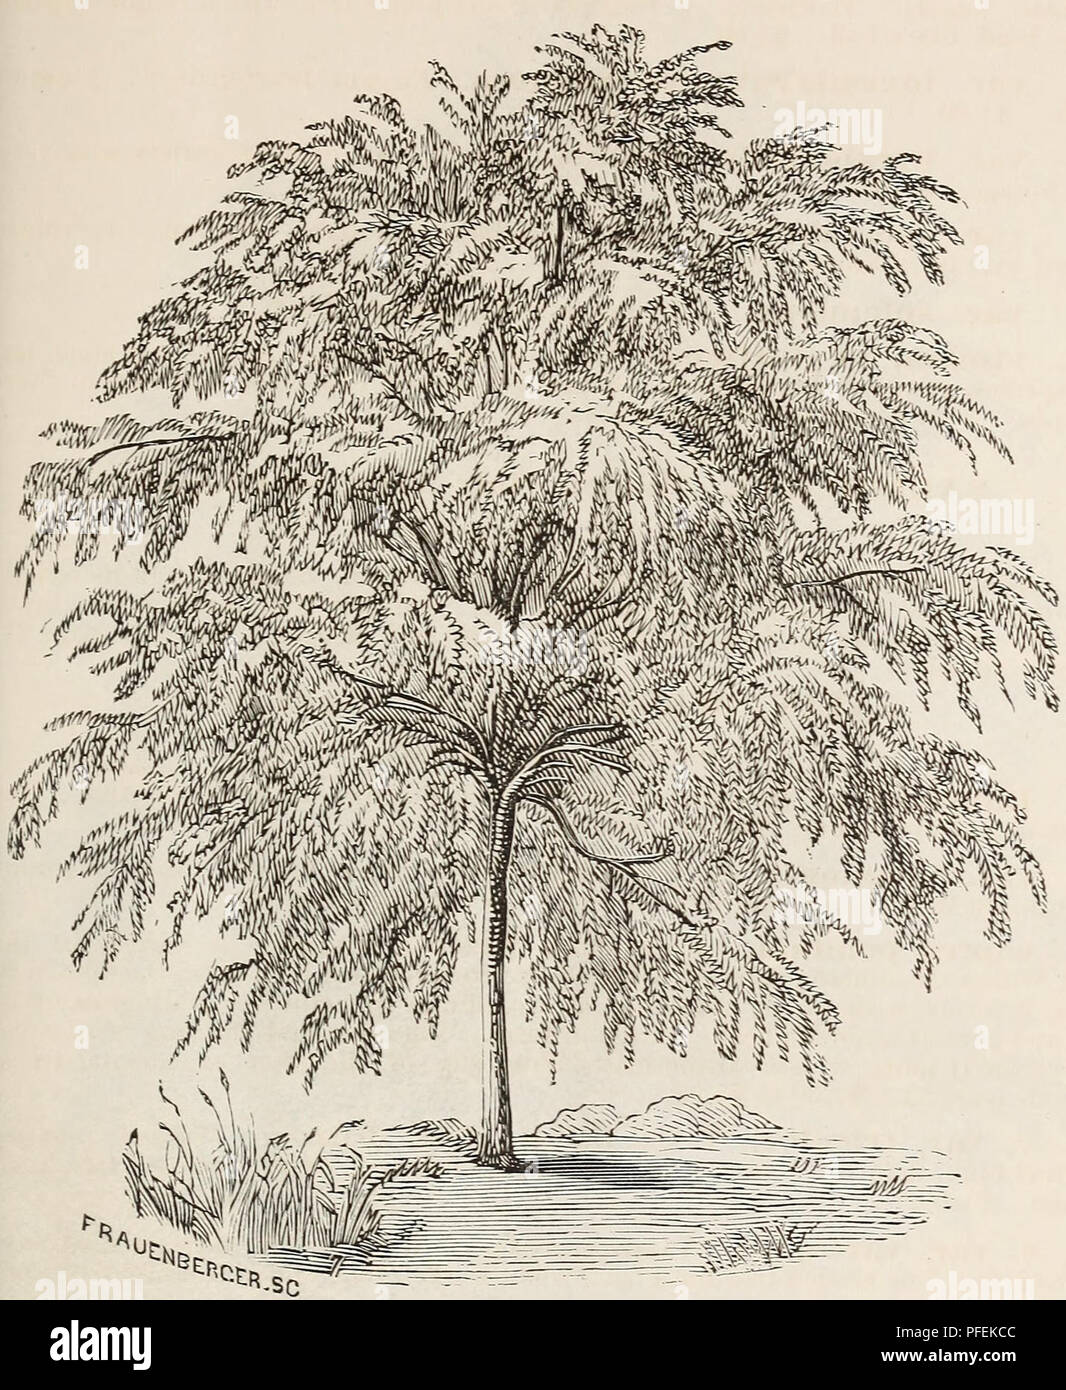 . Descriptive catalogue of ornamental trees, shrubs, roses, flowering plants, &amp;c. Ornamental trees Catalogs; Shrubs Catalogs; Roses Catalogs; Flowers Catalogs. ORXAMEXTAL TREES. SHRUBS, ETC. 35. SALIX PURPUREA. VAR. PENDULA. (aMEEICAN ^VEEPING or fountain WtLLOW.) Salix. Wisconsin Treeping-. Of drooping habit, and said to be perfectly hardy in Wisconsin. TAXODIUM. Deciduous Cypress. {Xat. Ord. Pinaccce.) T. disticlium. Deciduous ok Southern Cypress. A beautiful stately tree, â with small, elegant yew-like foliage. TILilA. Linden or Lime Tree. Linde, Ger. Tilleue, Fr. {Nat. Ord. Tiliacei-e. Stock Photo